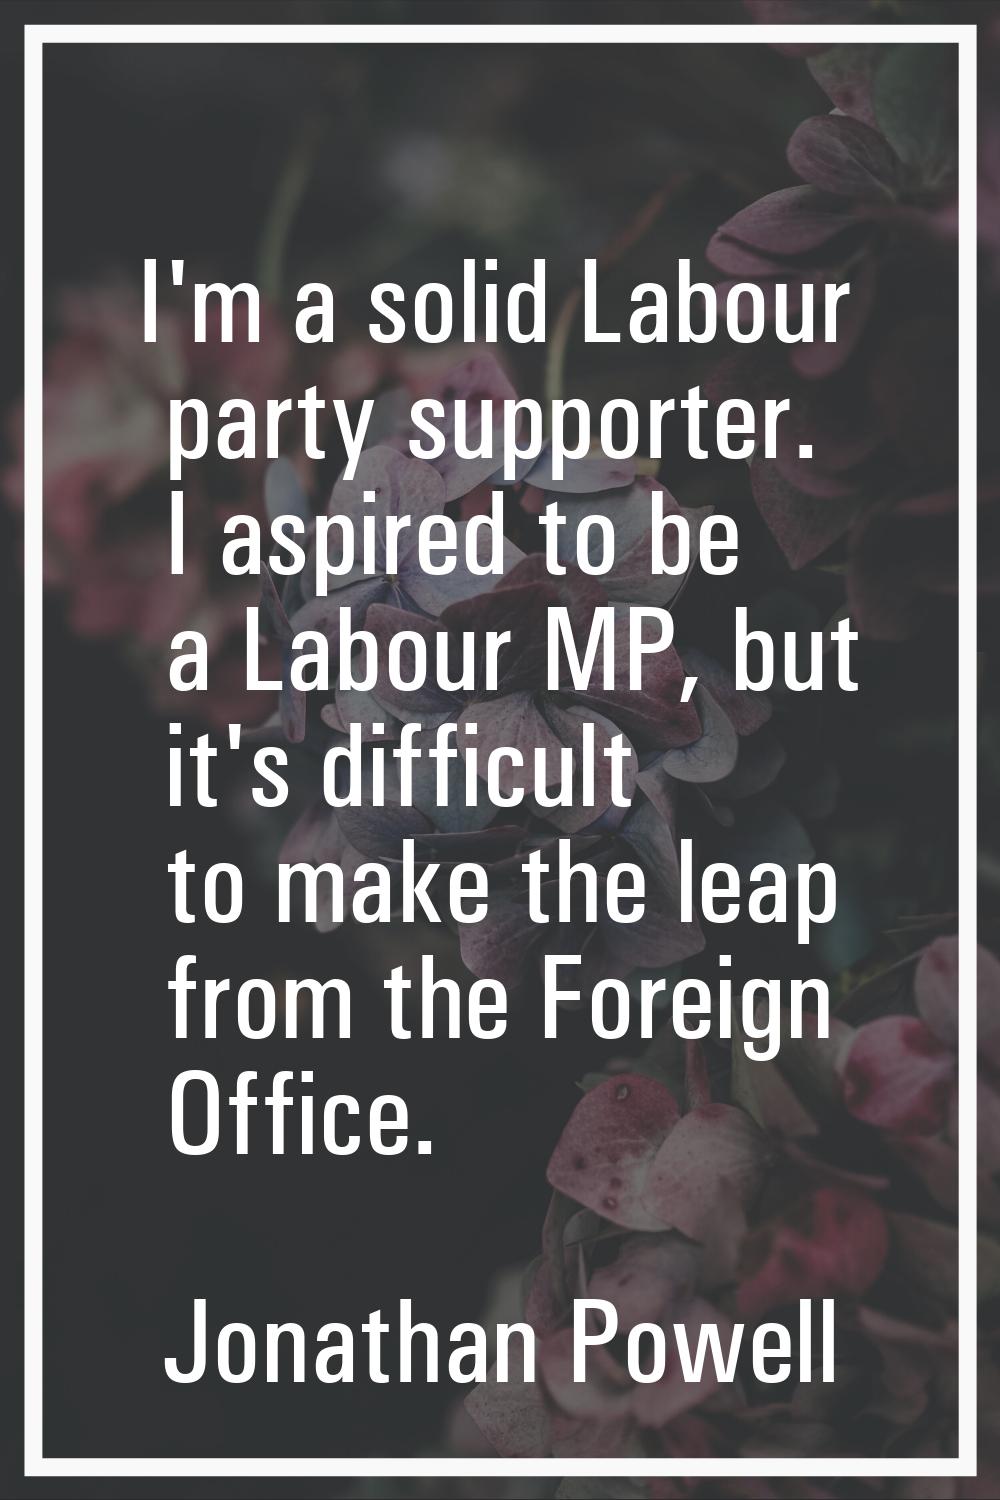 I'm a solid Labour party supporter. I aspired to be a Labour MP, but it's difficult to make the lea